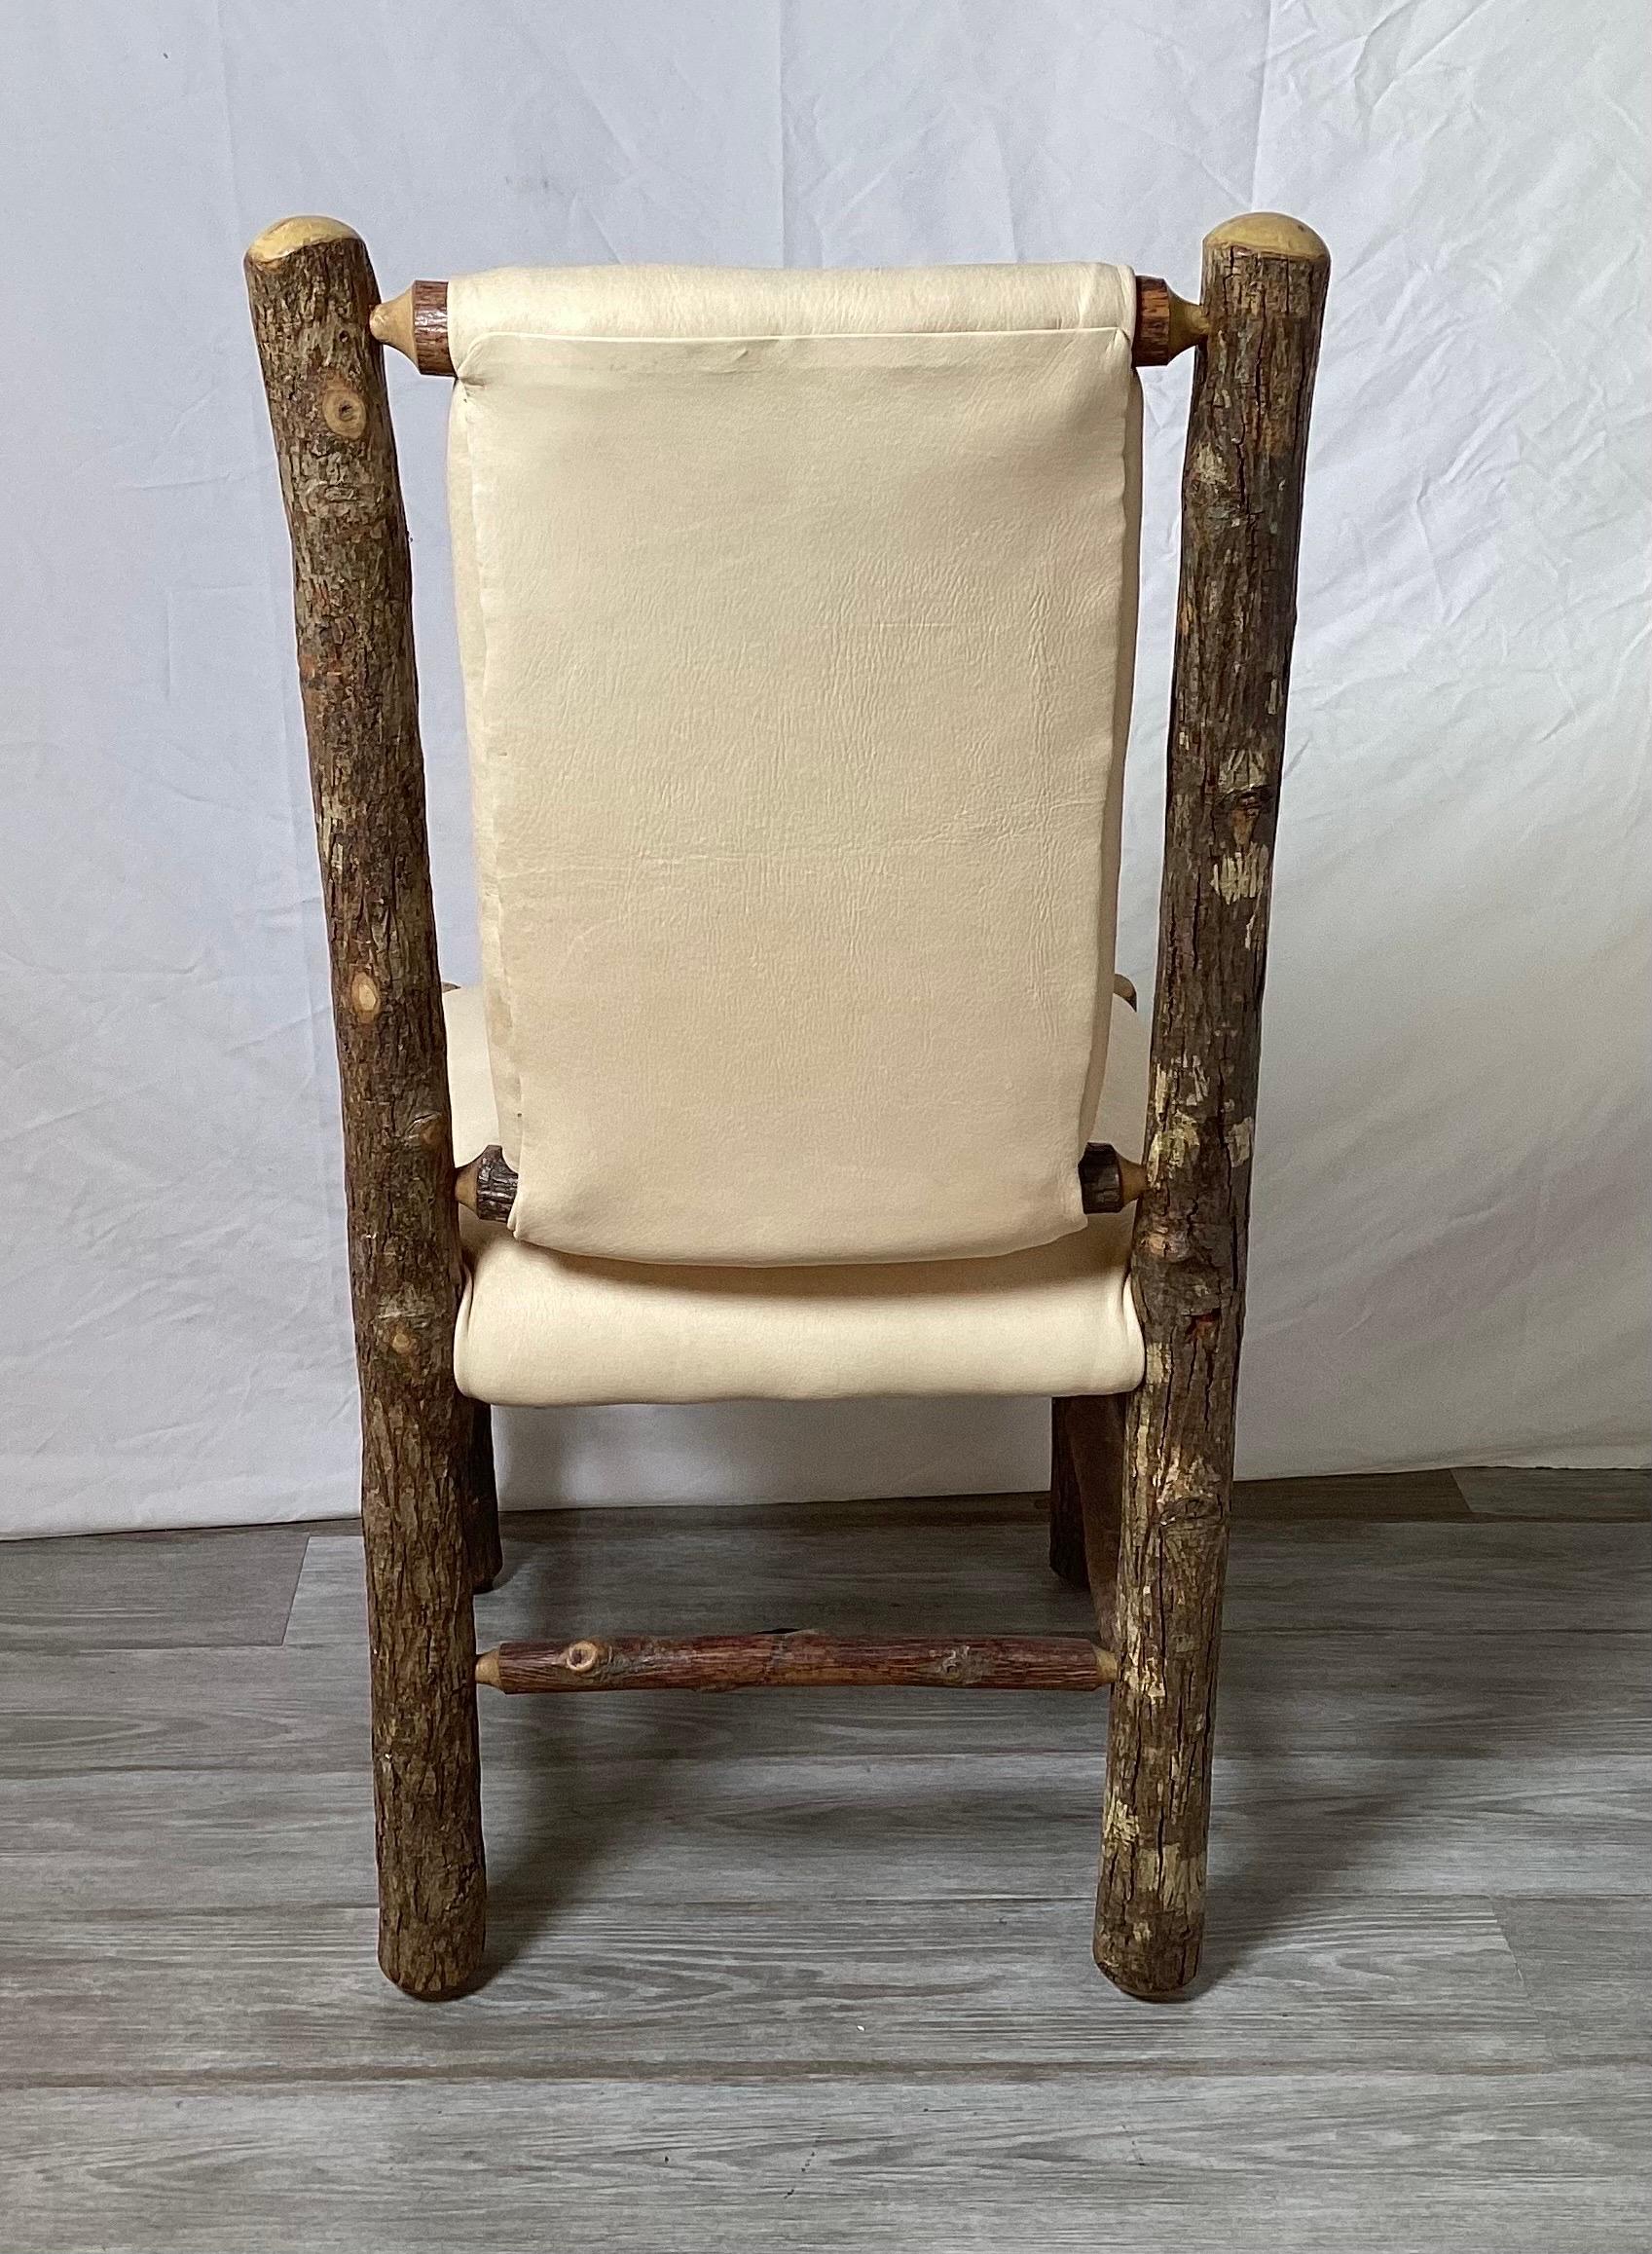 Adirondack Old Hickory Accent Chair With Deer Skin Covering For Sale